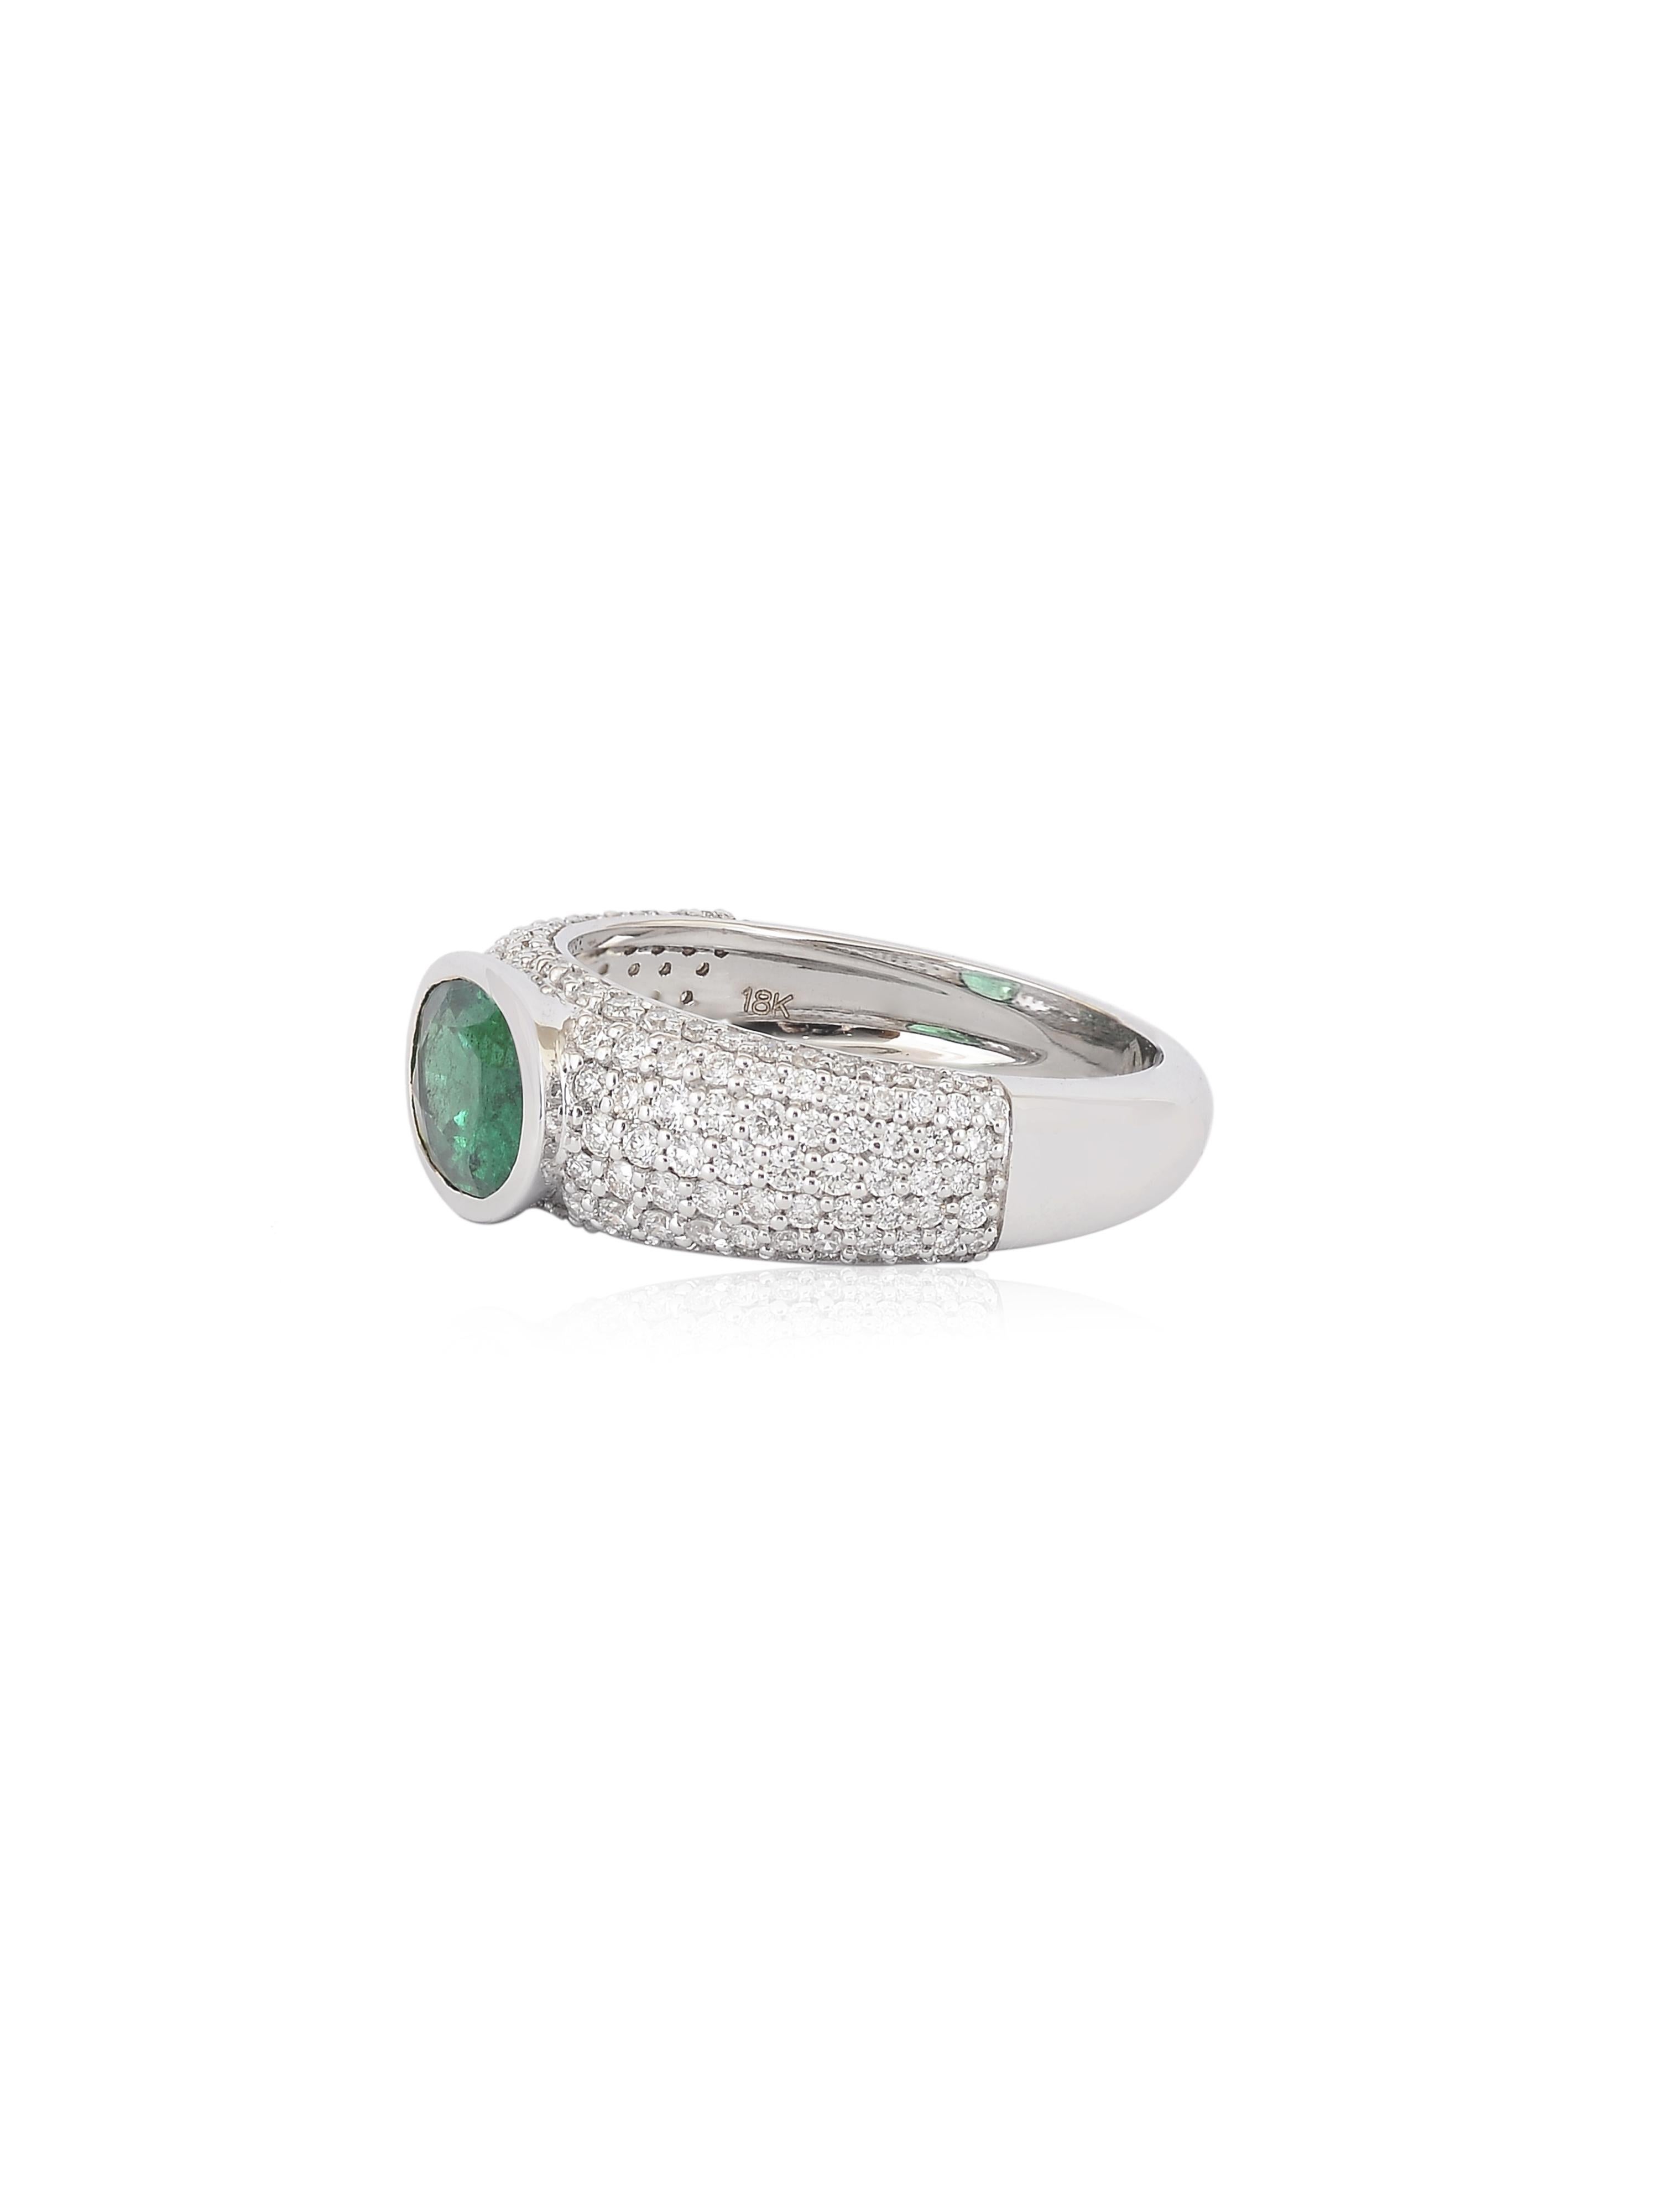 A white gold ring with a 1.60 carats Emerald cut stone in the centre and cluster of diamonds all around. The Emerald and white diamonds shine and sparkle when light falls on them. Its a piece that can be worn with all kinds of outfits and all